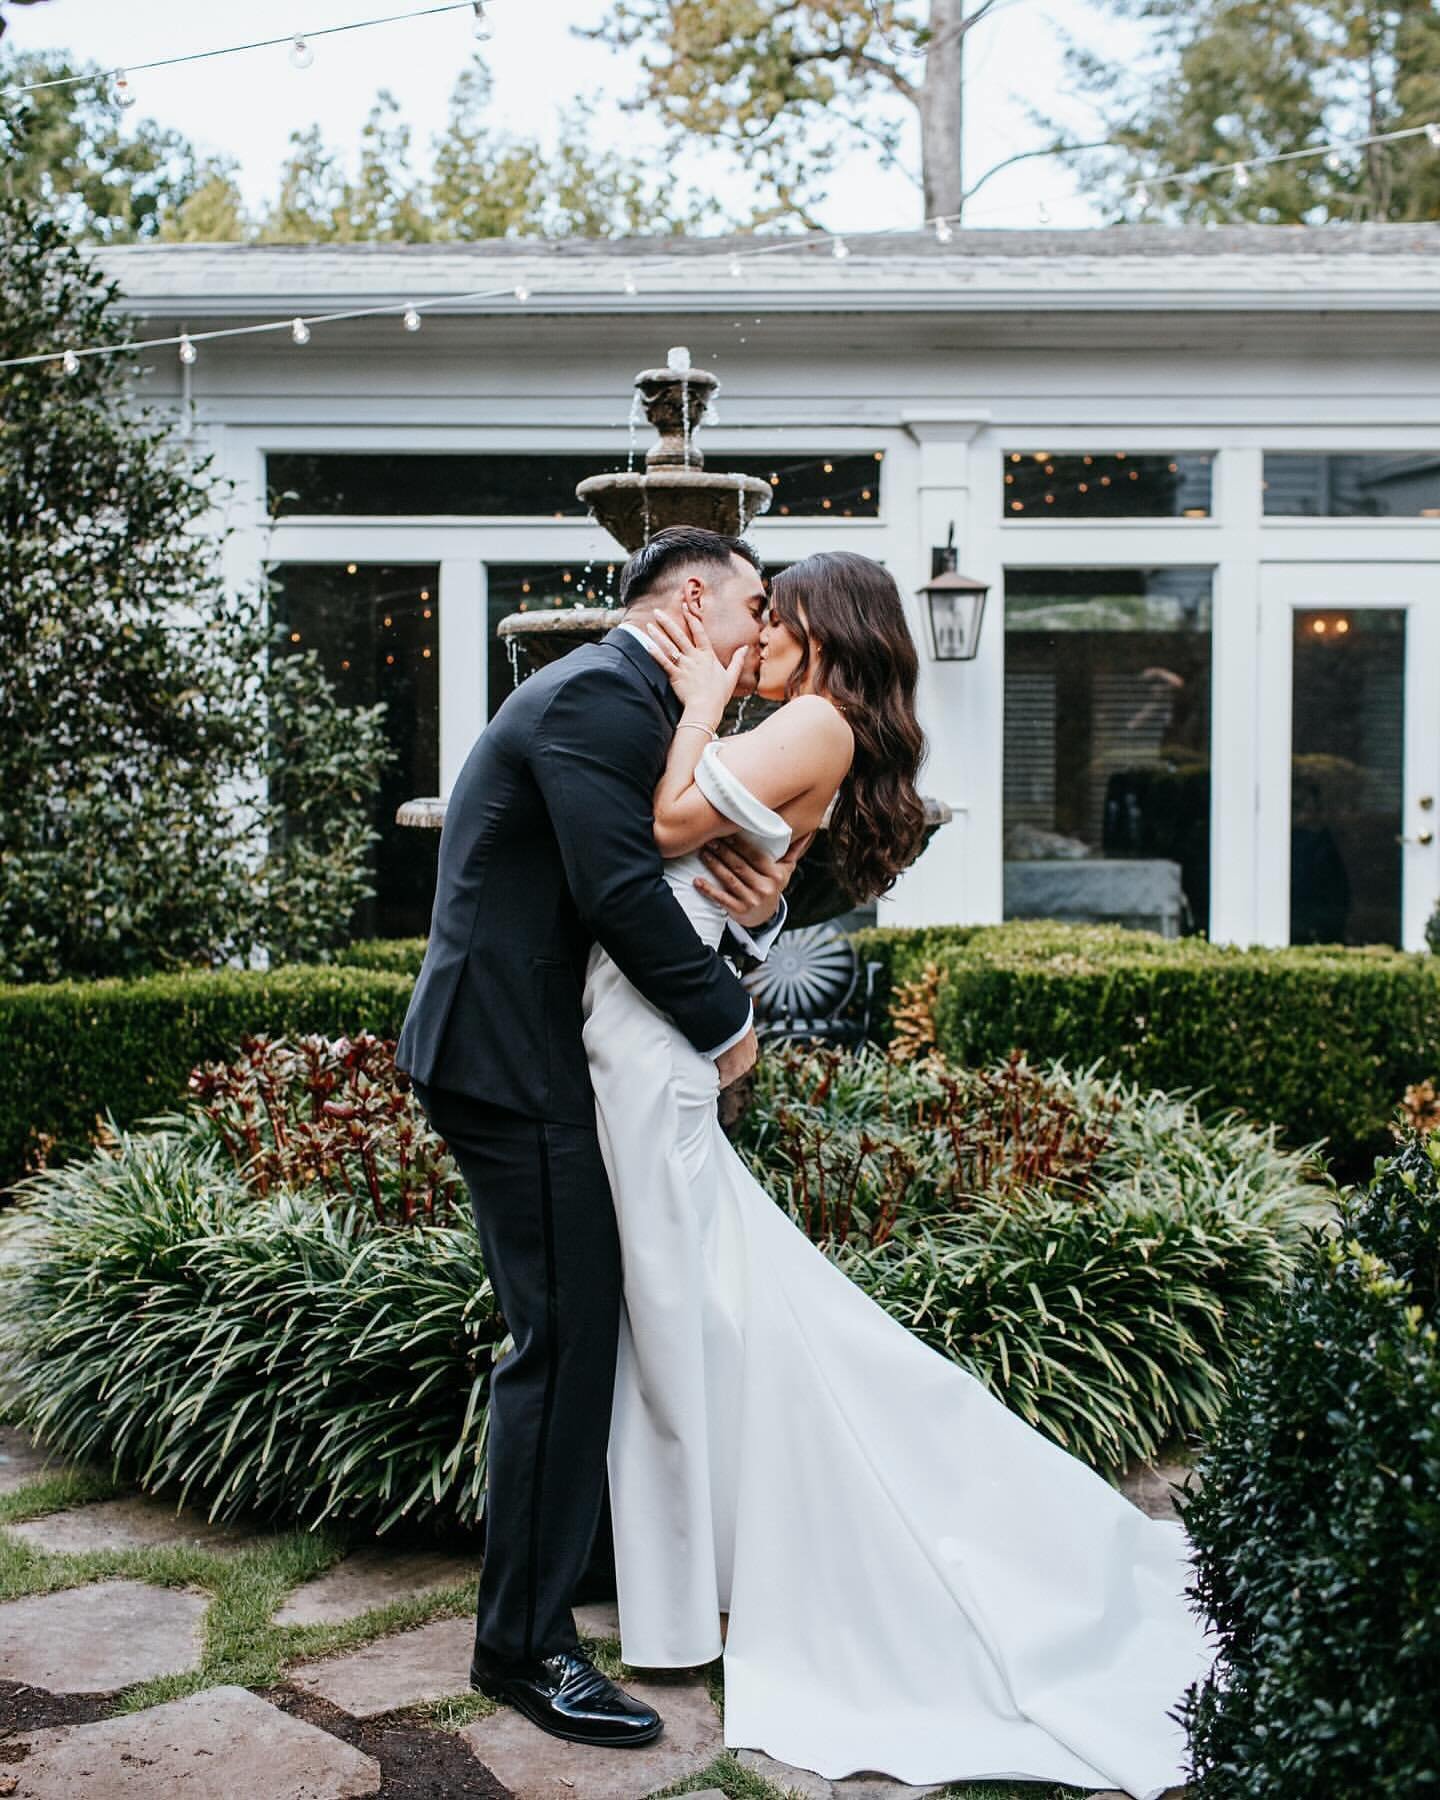 Wow. Just wow.
There&rsquo;s nothing quite like stealing a kiss in the courtyard garden at Primrose Cottage, the perfect setting for the most romantic first look. 🌸 #FirstLook #primrosecottageweddings #RomanticKiss #GardenWedding

Photo: @brooke.cou